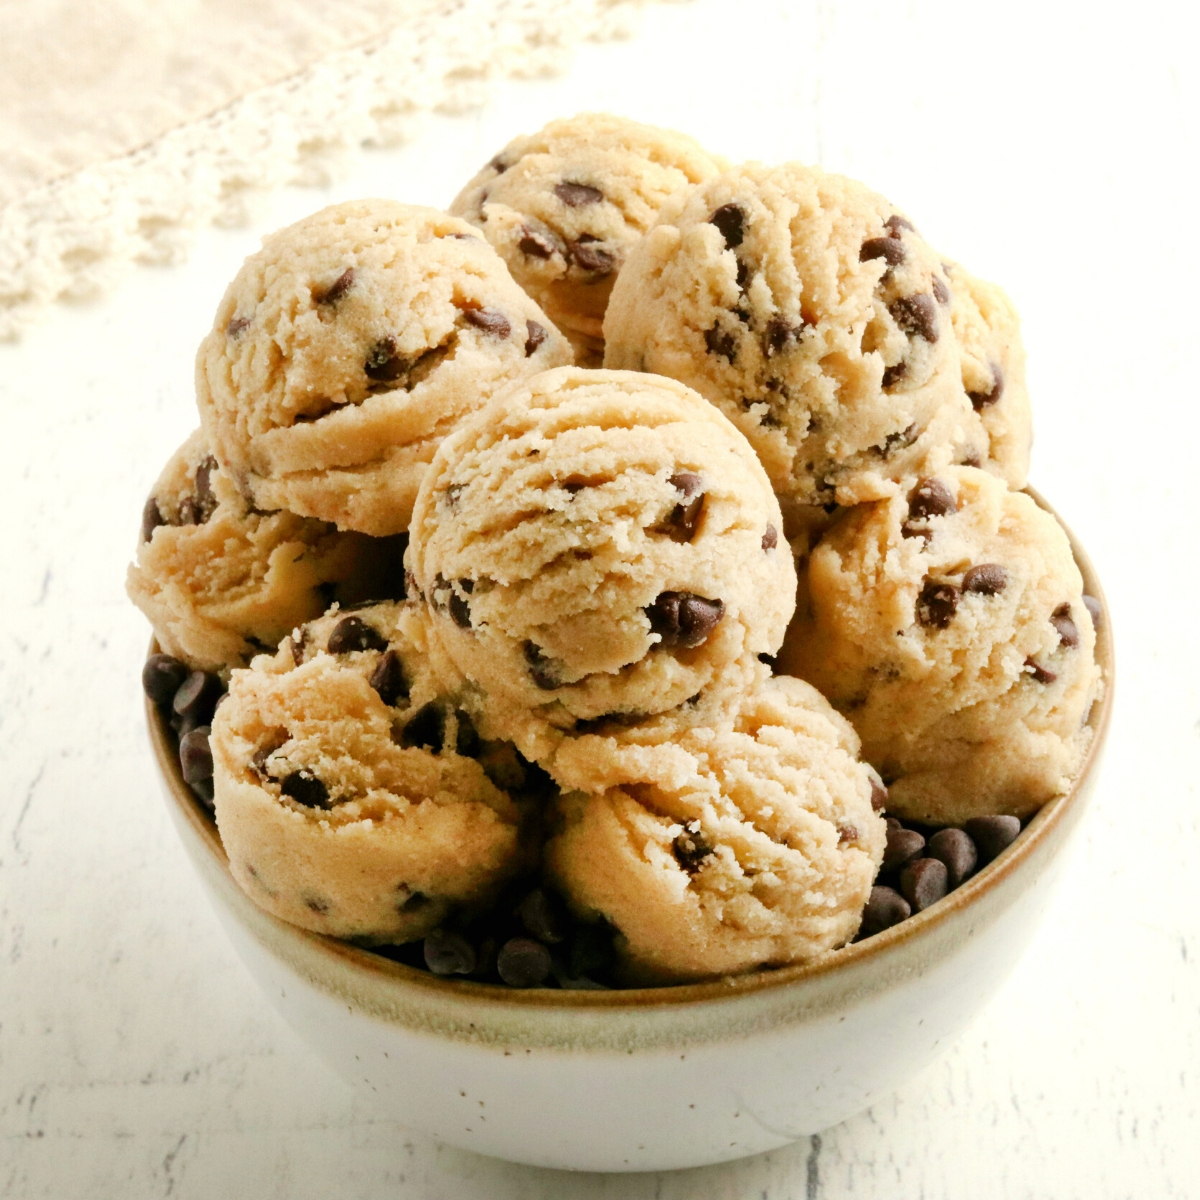 Fresh Baked Cookies and Edible Cookie Dough